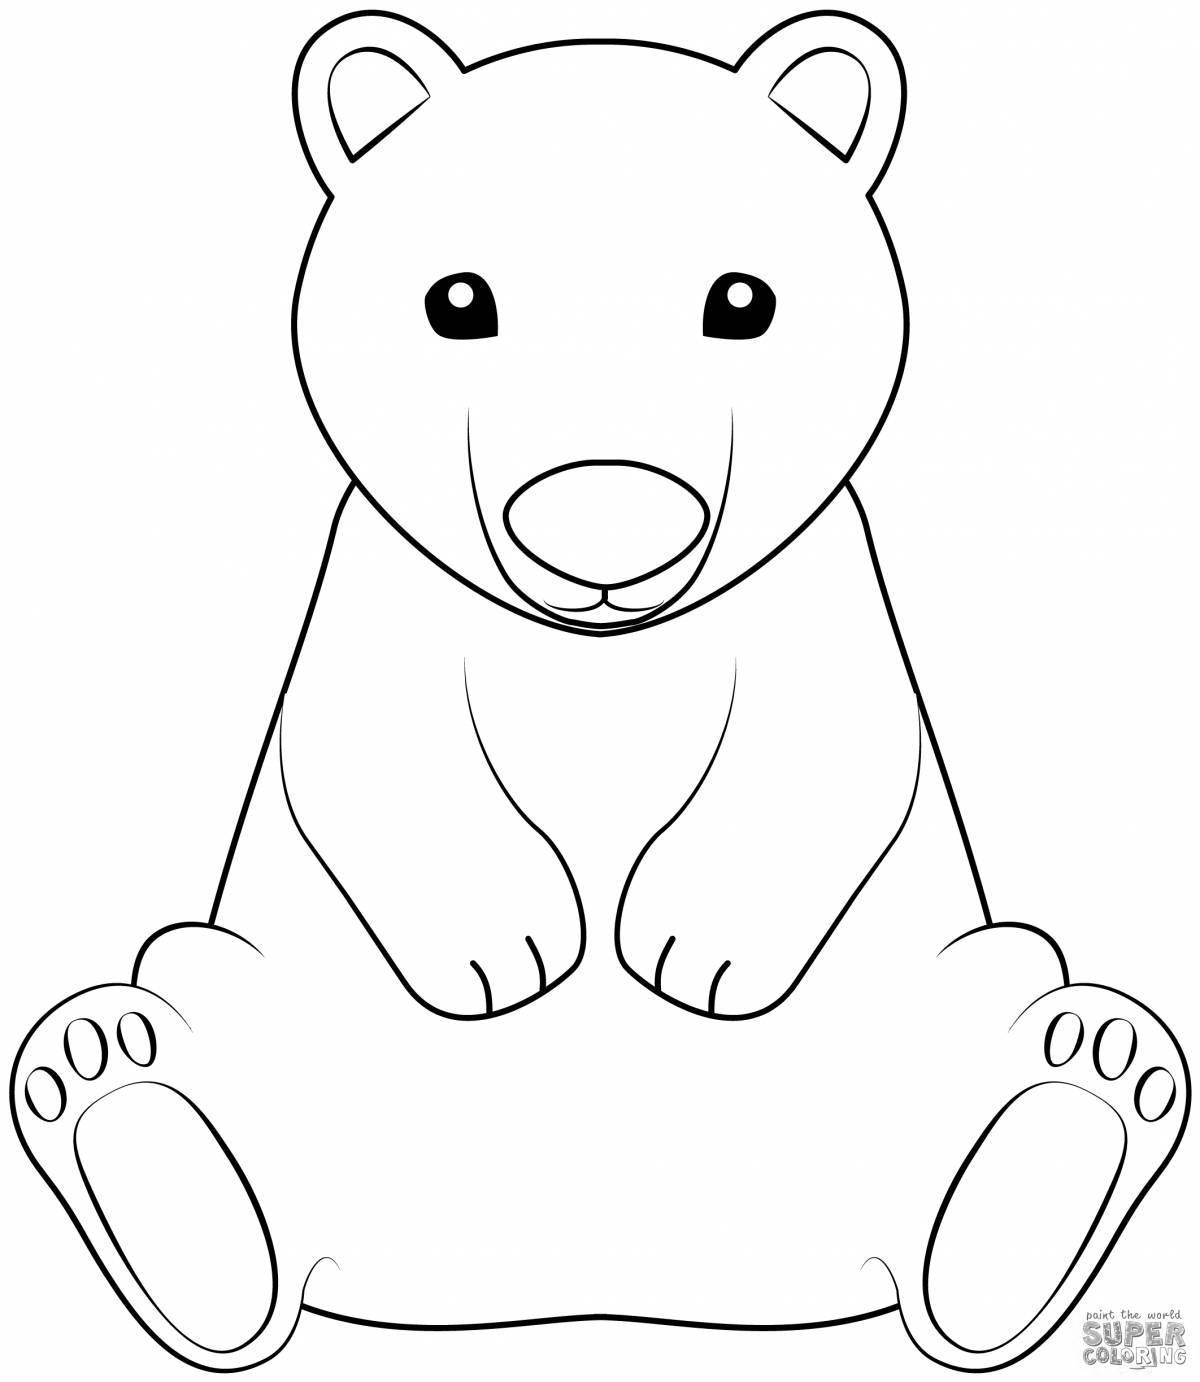 Colorful teddy bear coloring book for 4-5 year olds